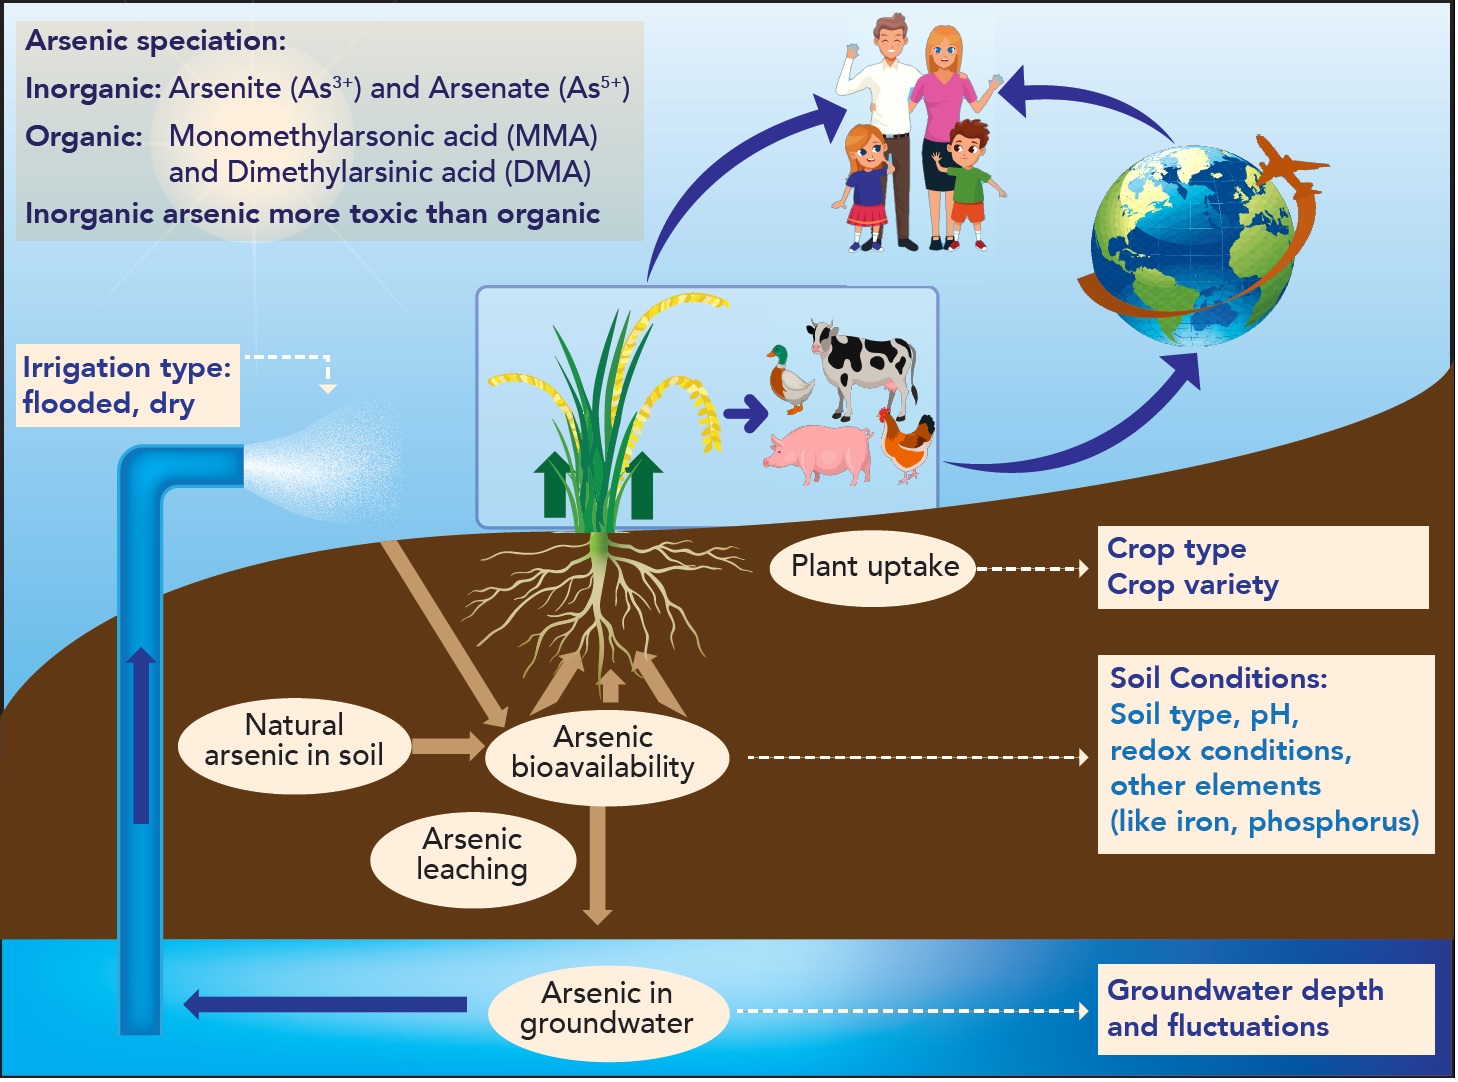 Figure 1. Schematic of processes of arsenic accumulation in soil due to groundwater irrigation and pathway to human dietary intake, including via trade. The key influencing biophysical factors are given in boxes. People vector created by jemastock—www.freepik.com. Design vector created by pikisuperstar—www.freepik.com. Paddy vectors by Vecteezy—www.vecteezy.com. Reproduced from pixabay (2017)